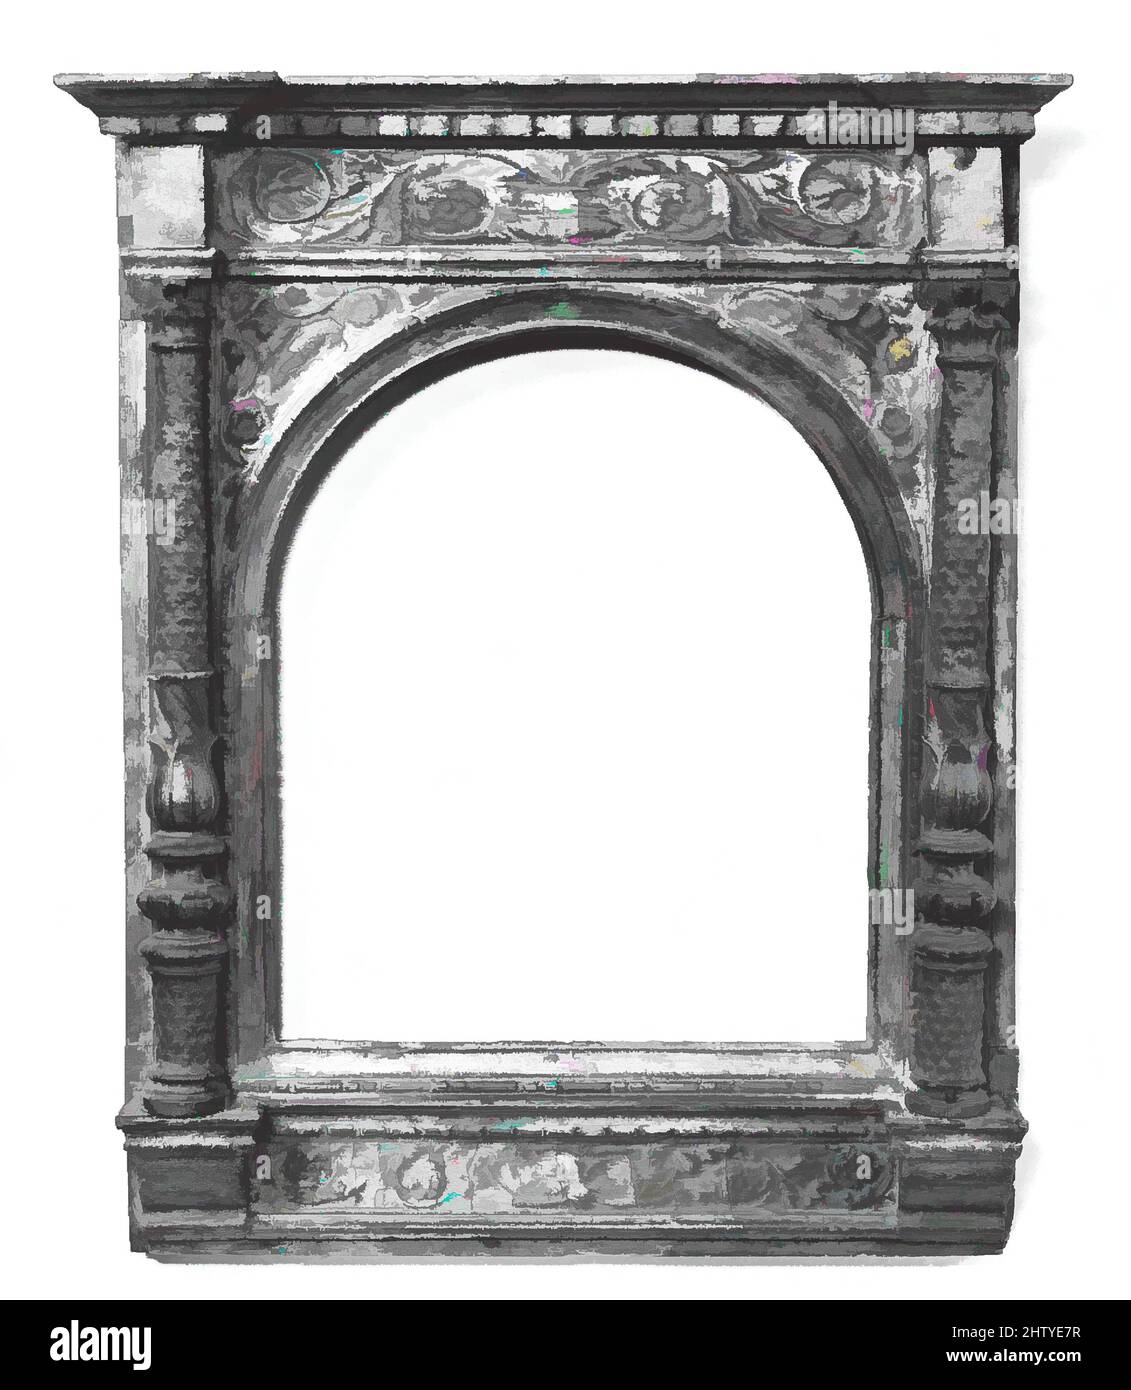 Art inspired by Tabernacle frame, early 16th century, Italian, Venice, Pine and poplar, Overall: 25 x 20 1/4, Frames, Classic works modernized by Artotop with a splash of modernity. Shapes, color and value, eye-catching visual impact on art. Emotions through freedom of artworks in a contemporary way. A timeless message pursuing a wildly creative new direction. Artists turning to the digital medium and creating the Artotop NFT Stock Photo